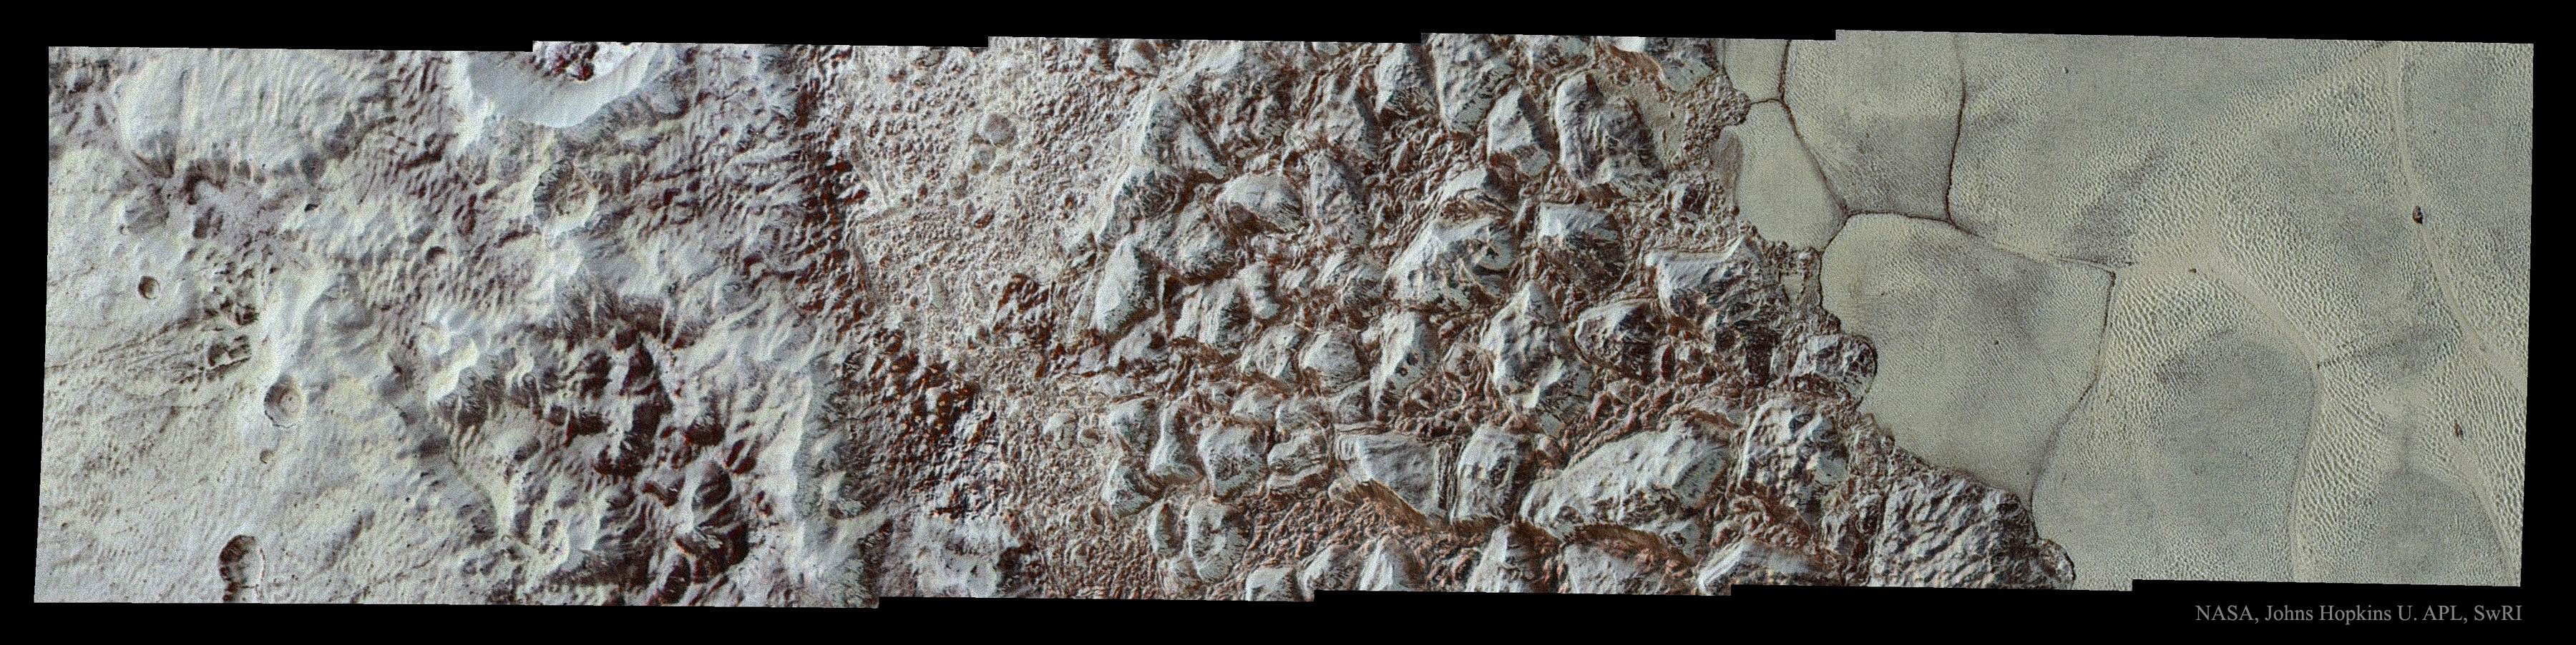 Pluto: From Mountains to Plains